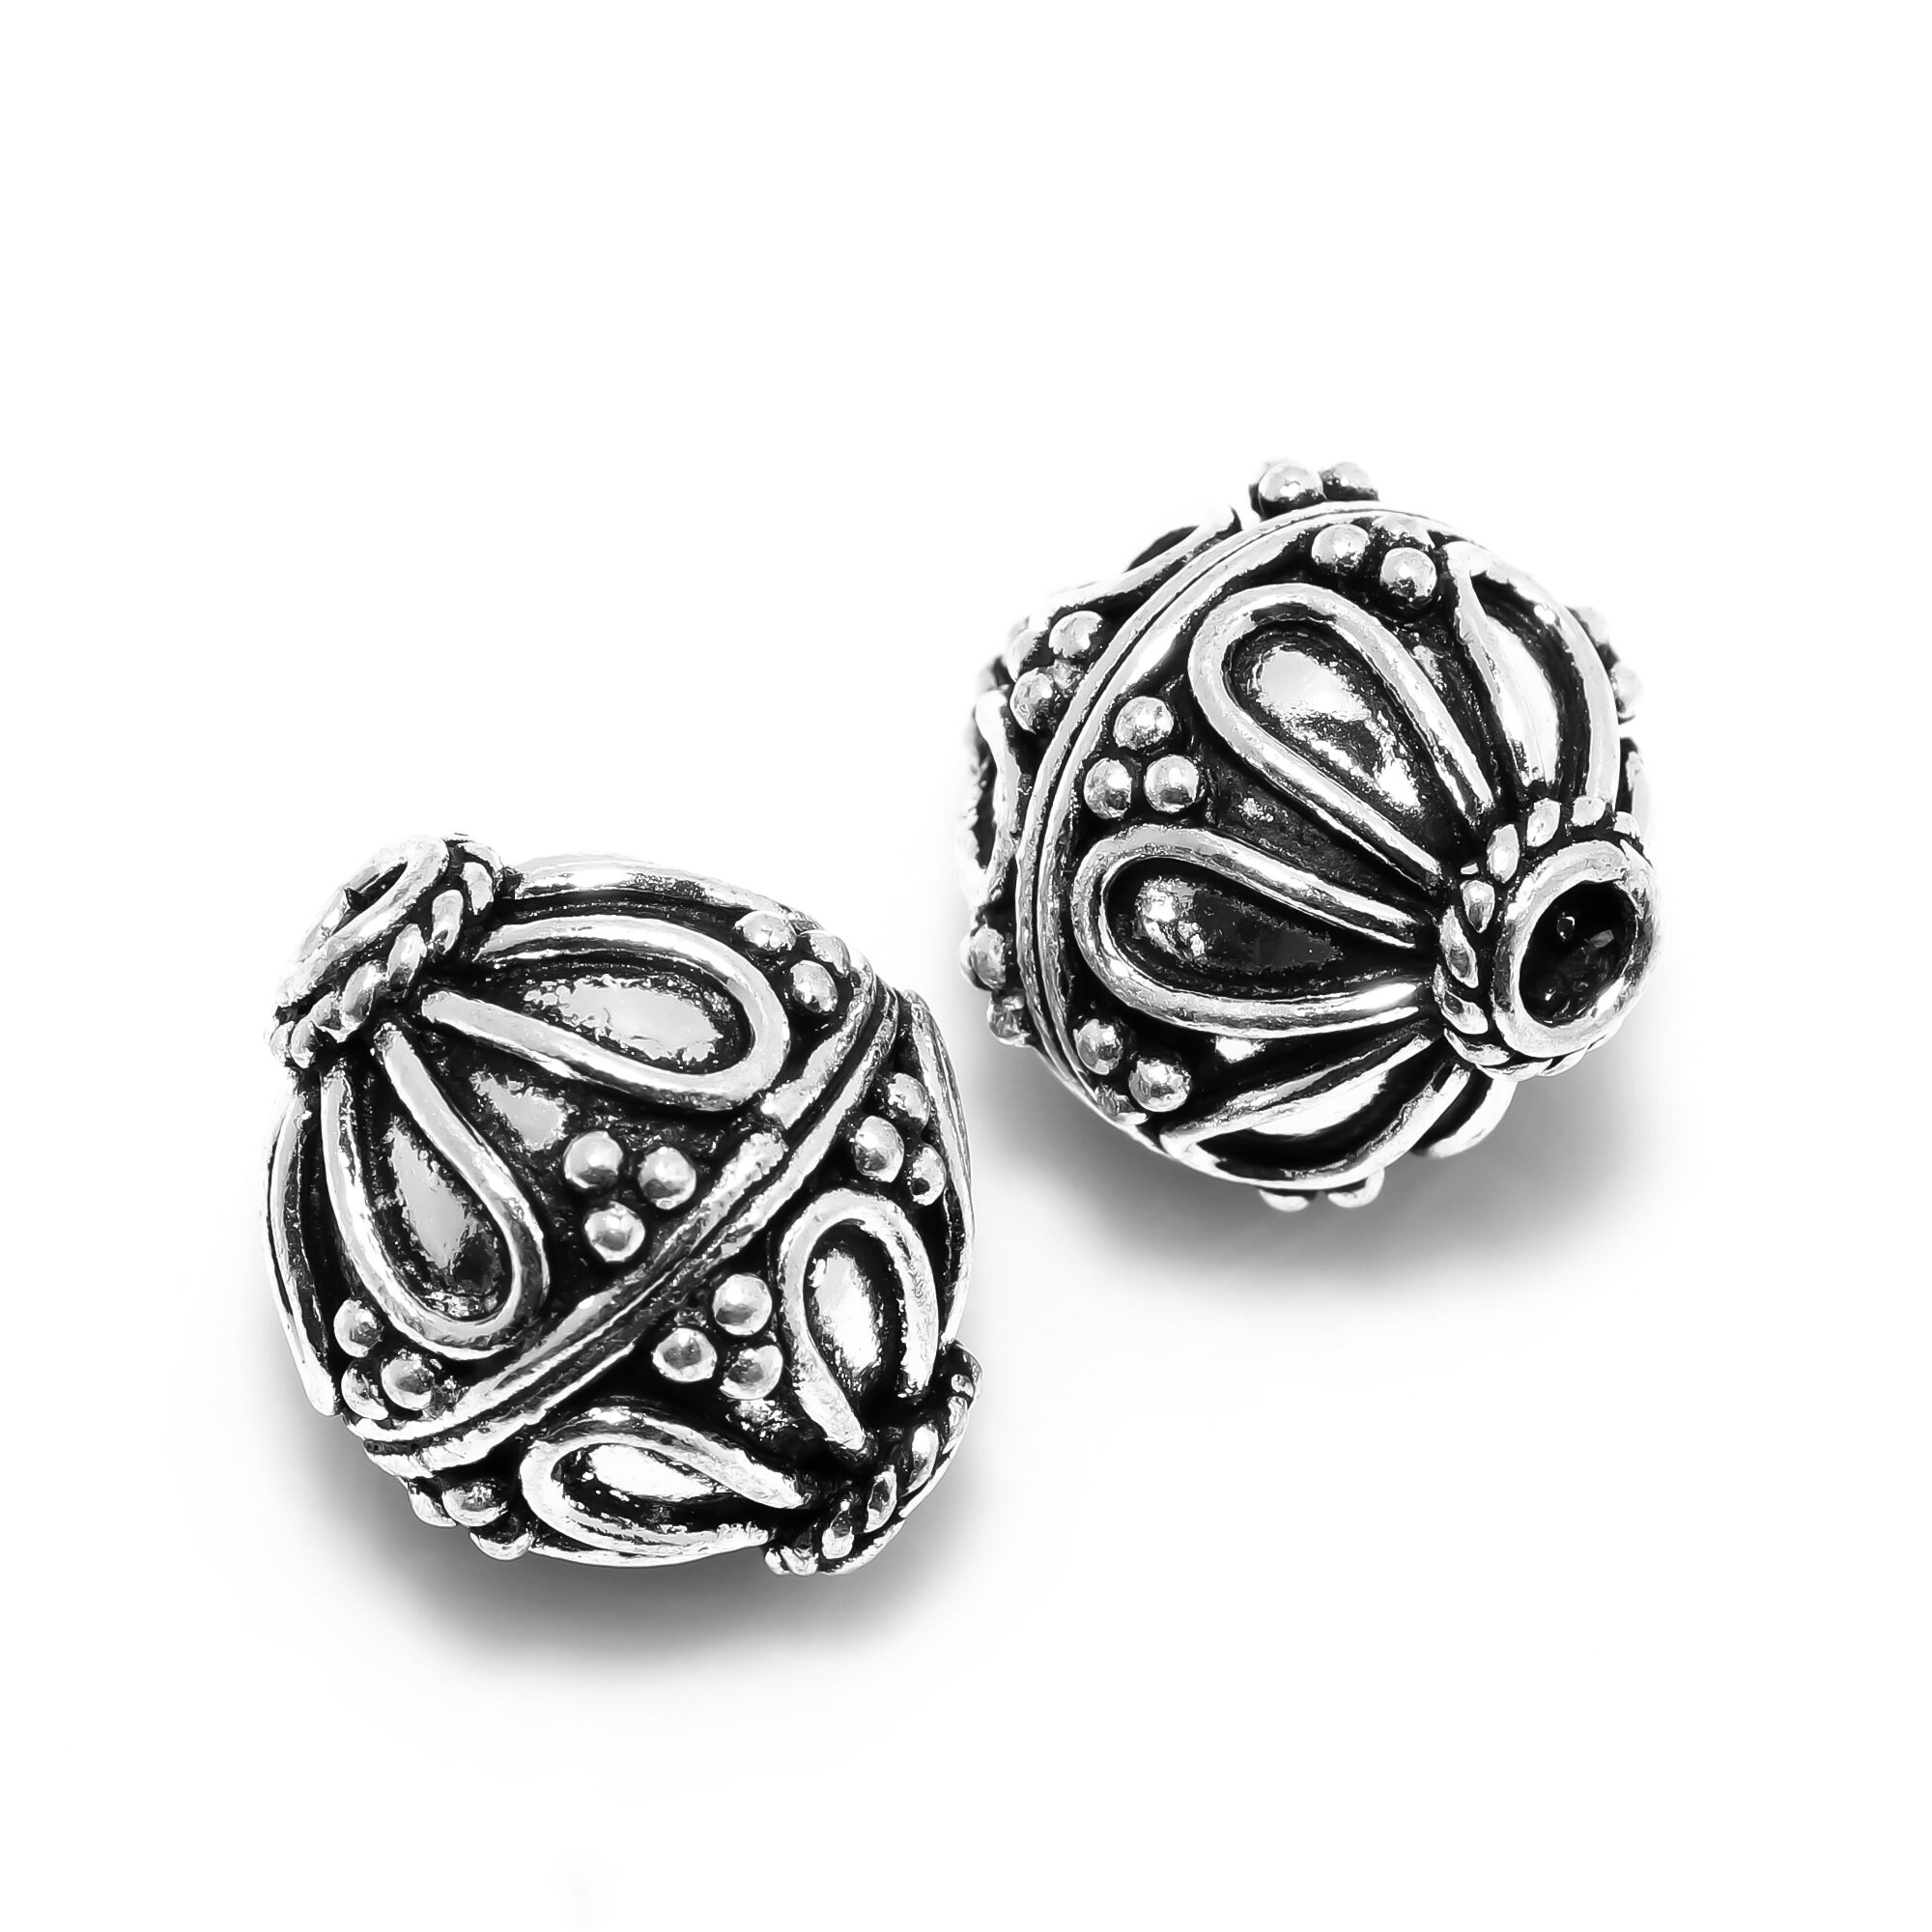 2 Pieces 15x17mm Bali Bead Antique Silver Plated Antique Gold - Etsy